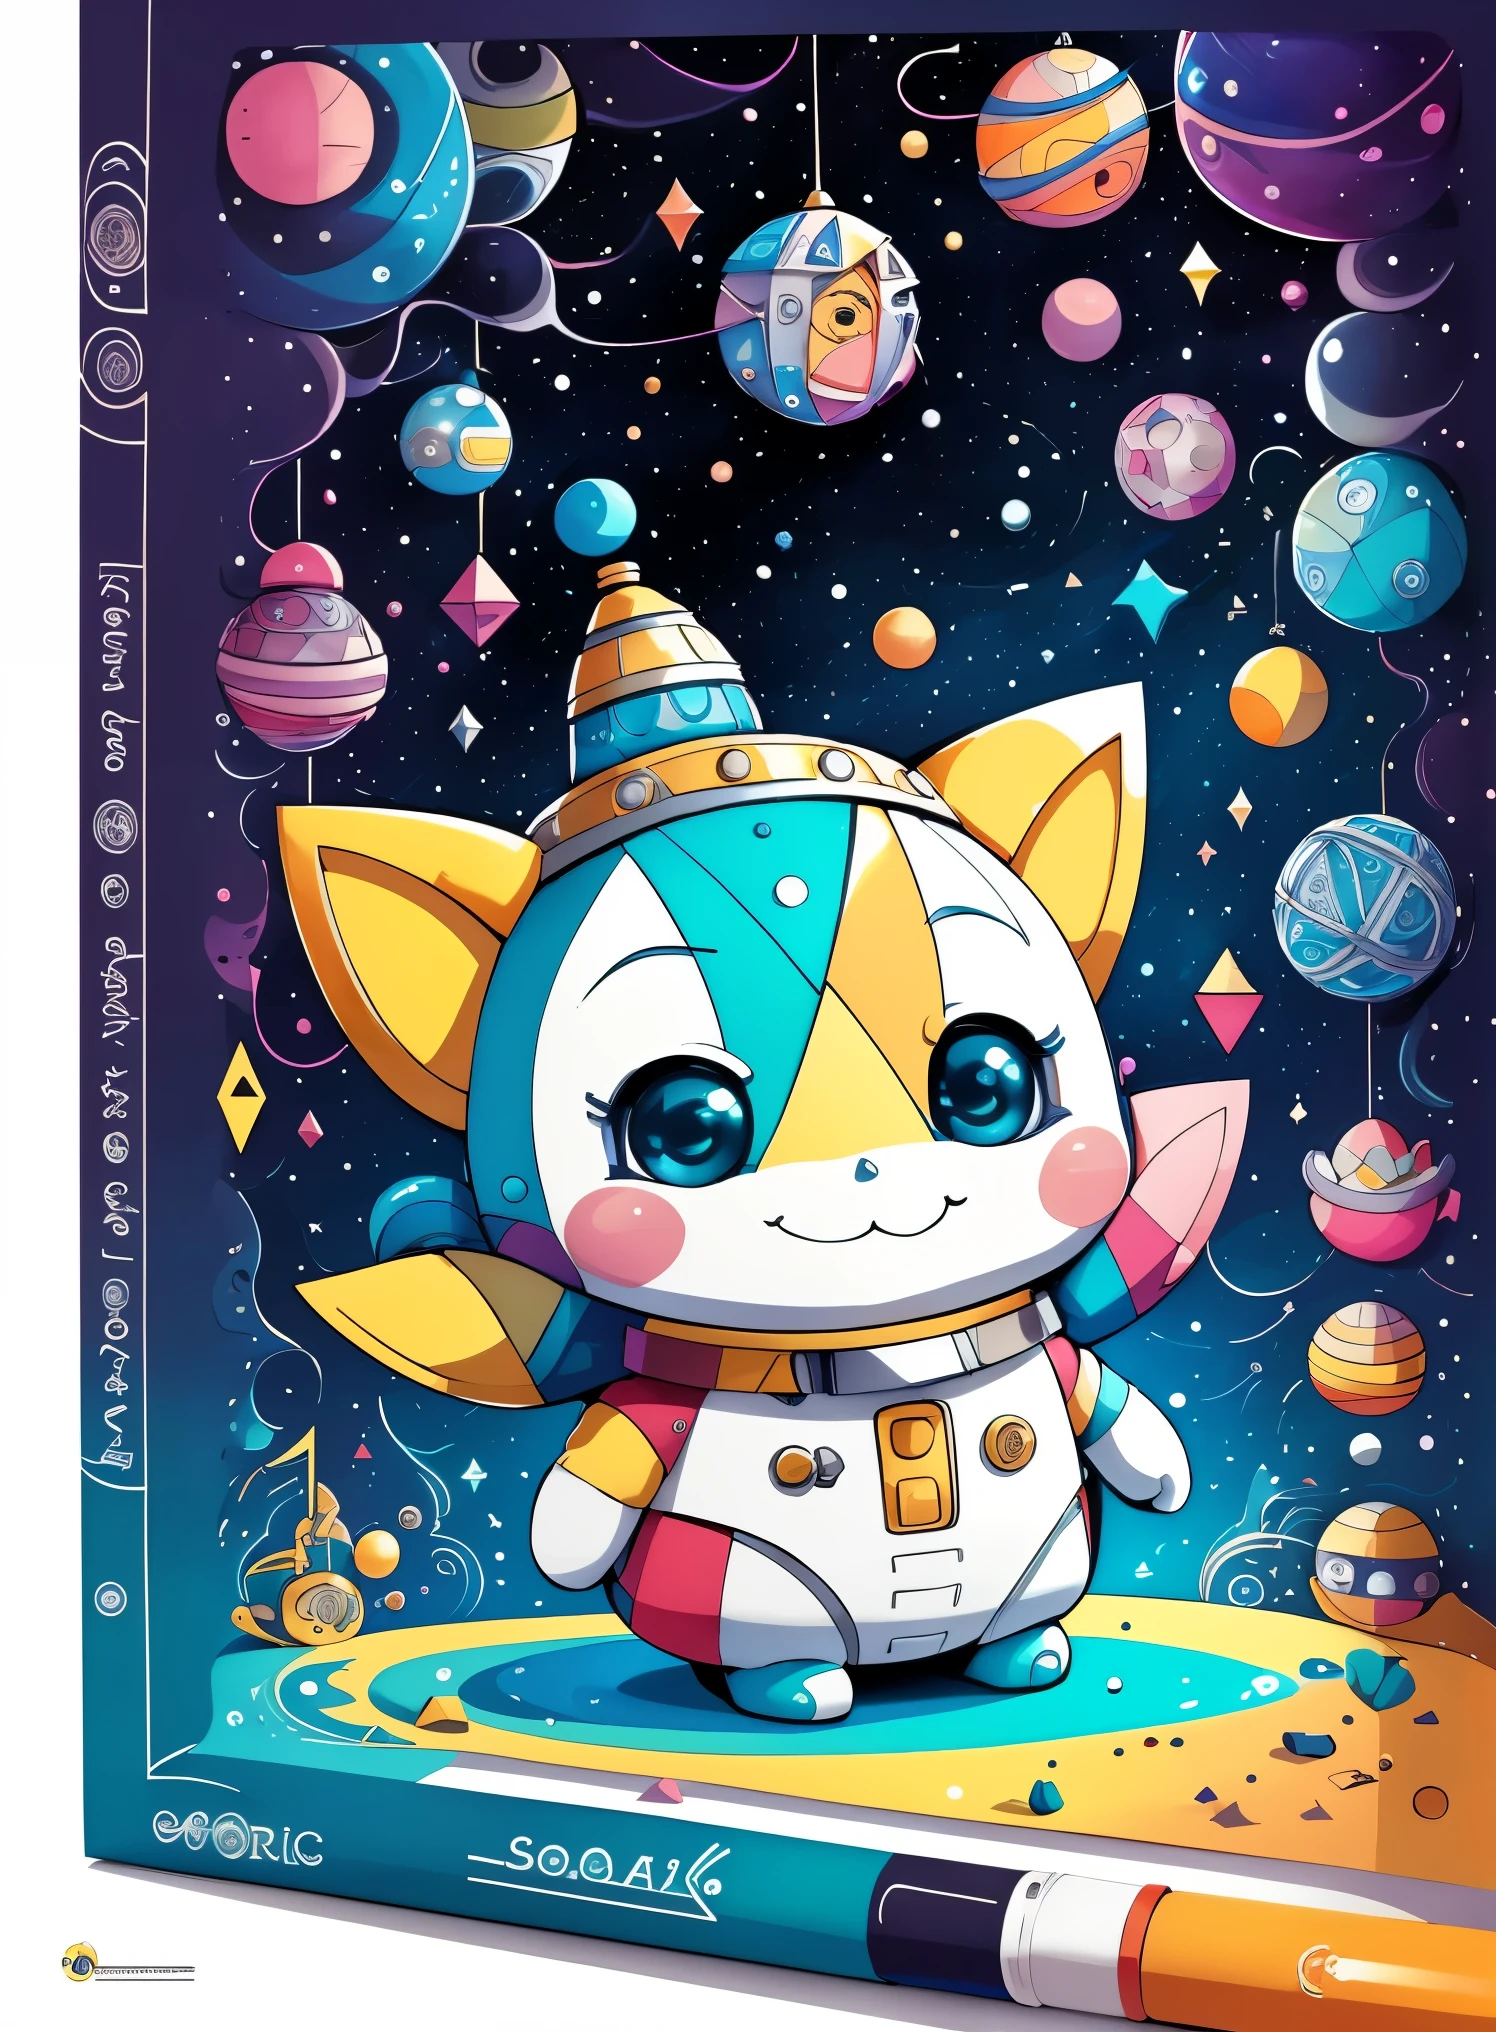 (cute spaceship smiling) Munchkin, Geometric multidimensional wall portrait, Artbook, tchibi,
yang08k, comely, Colouring,
artworks, of the highest quality, best qualityer, offcial art, comely and Aesthetic,